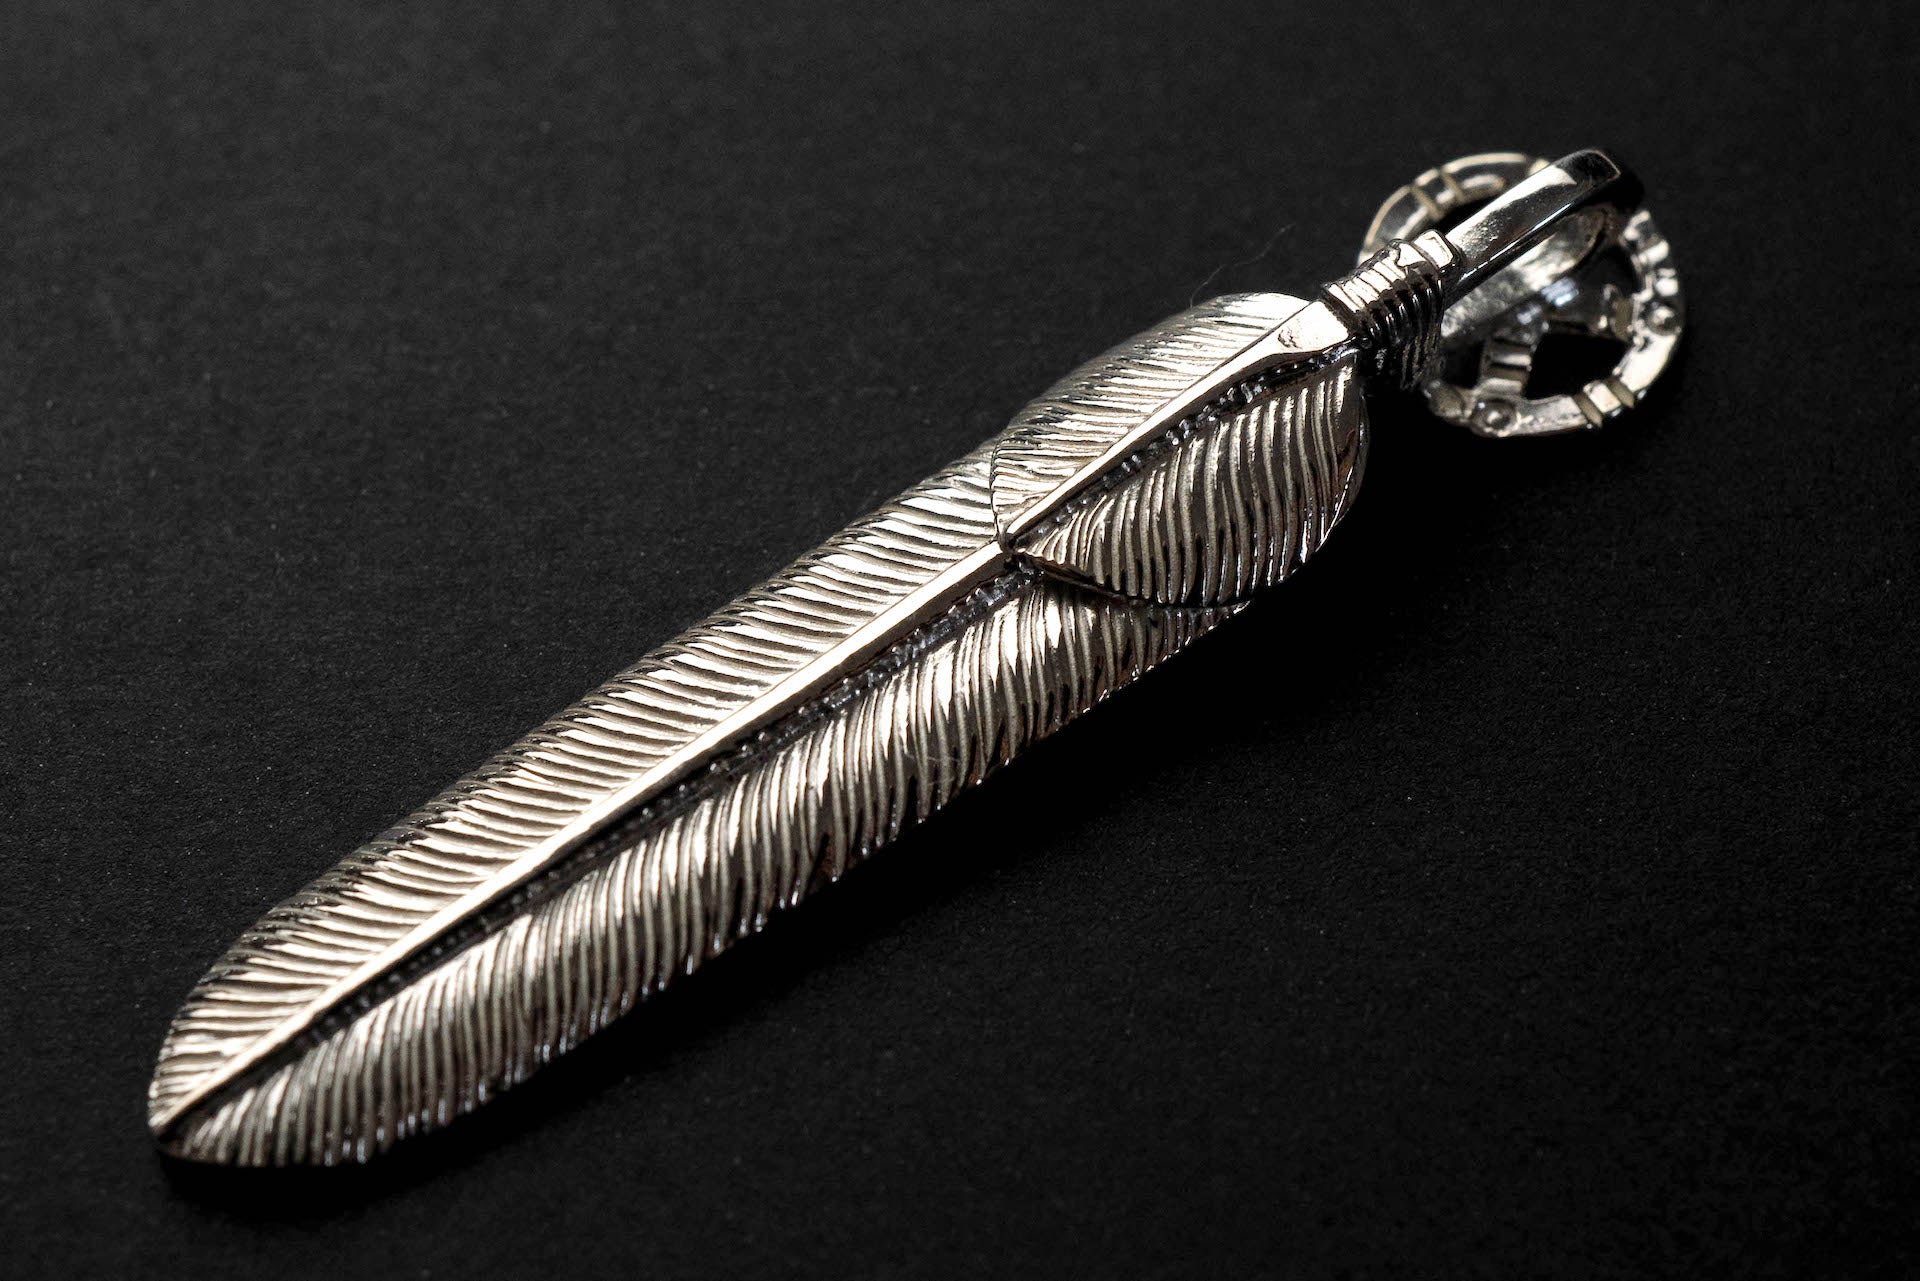 First Arrow's 25th Anniversary "Blessing" Feather Pendant (ANN-25-02)